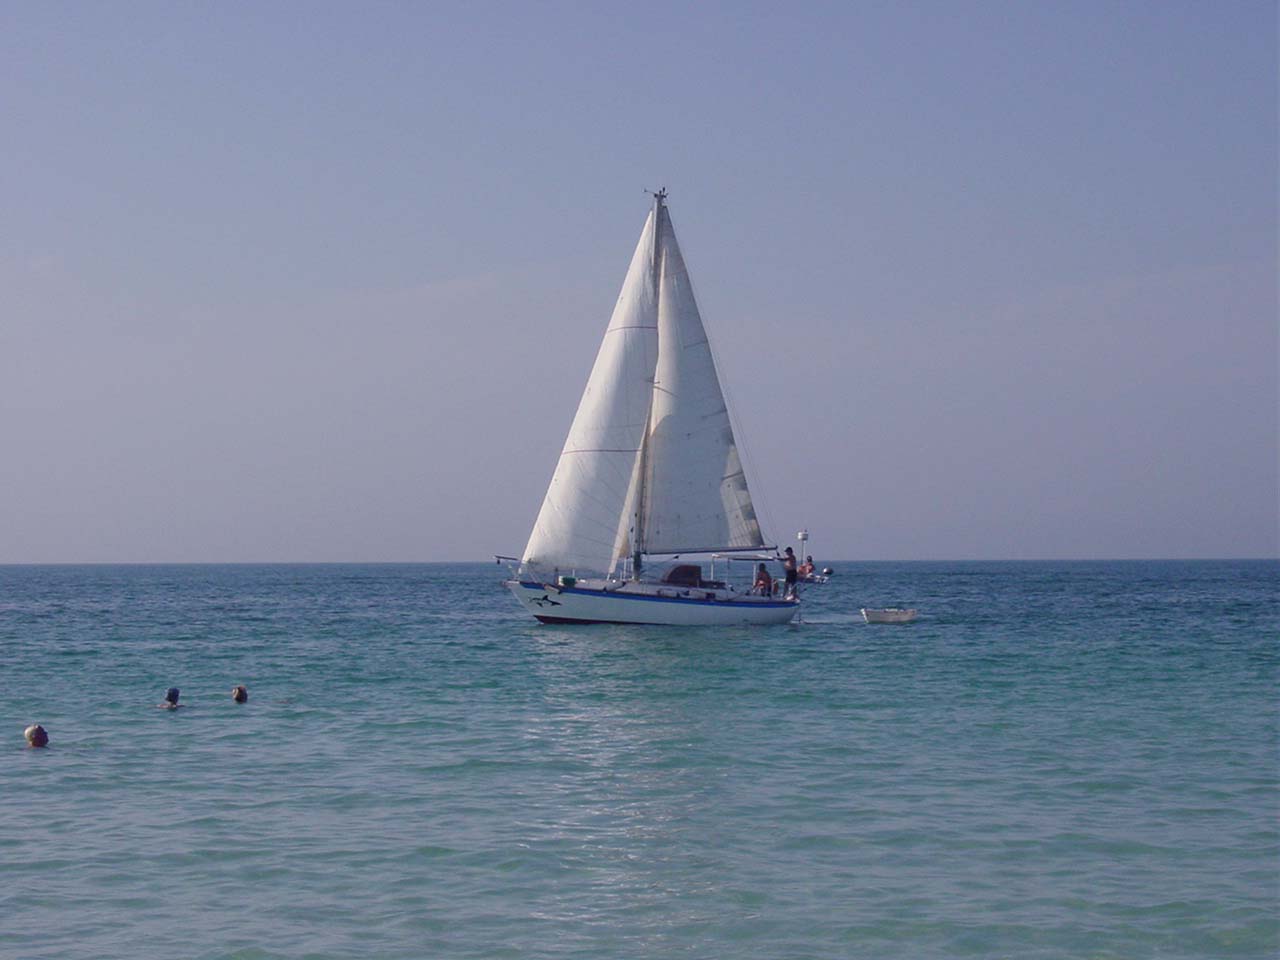 there is a sailboat with white sails in the water